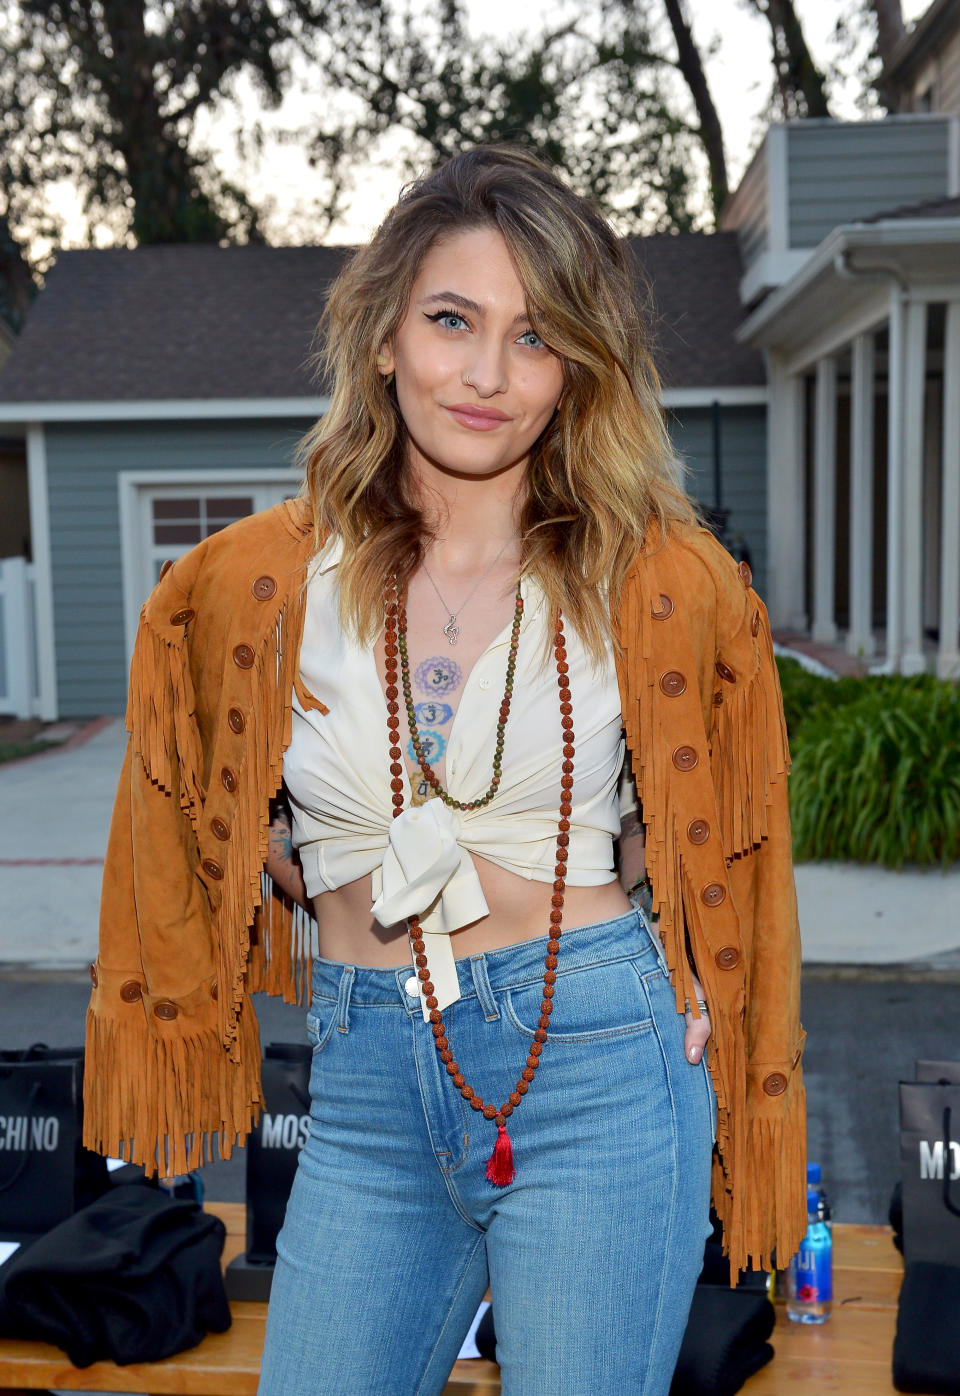 UNIVERSAL CITY, CALIFORNIA - JUNE 07: Paris Jackson attends the Moschino Spring/Summer 20 Menswear and Women's Resort Collection at Universal Studios Hollywood on June 07, 2019 in Universal City, California. (Photo by Donato Sardella/Getty Images for Moschino)